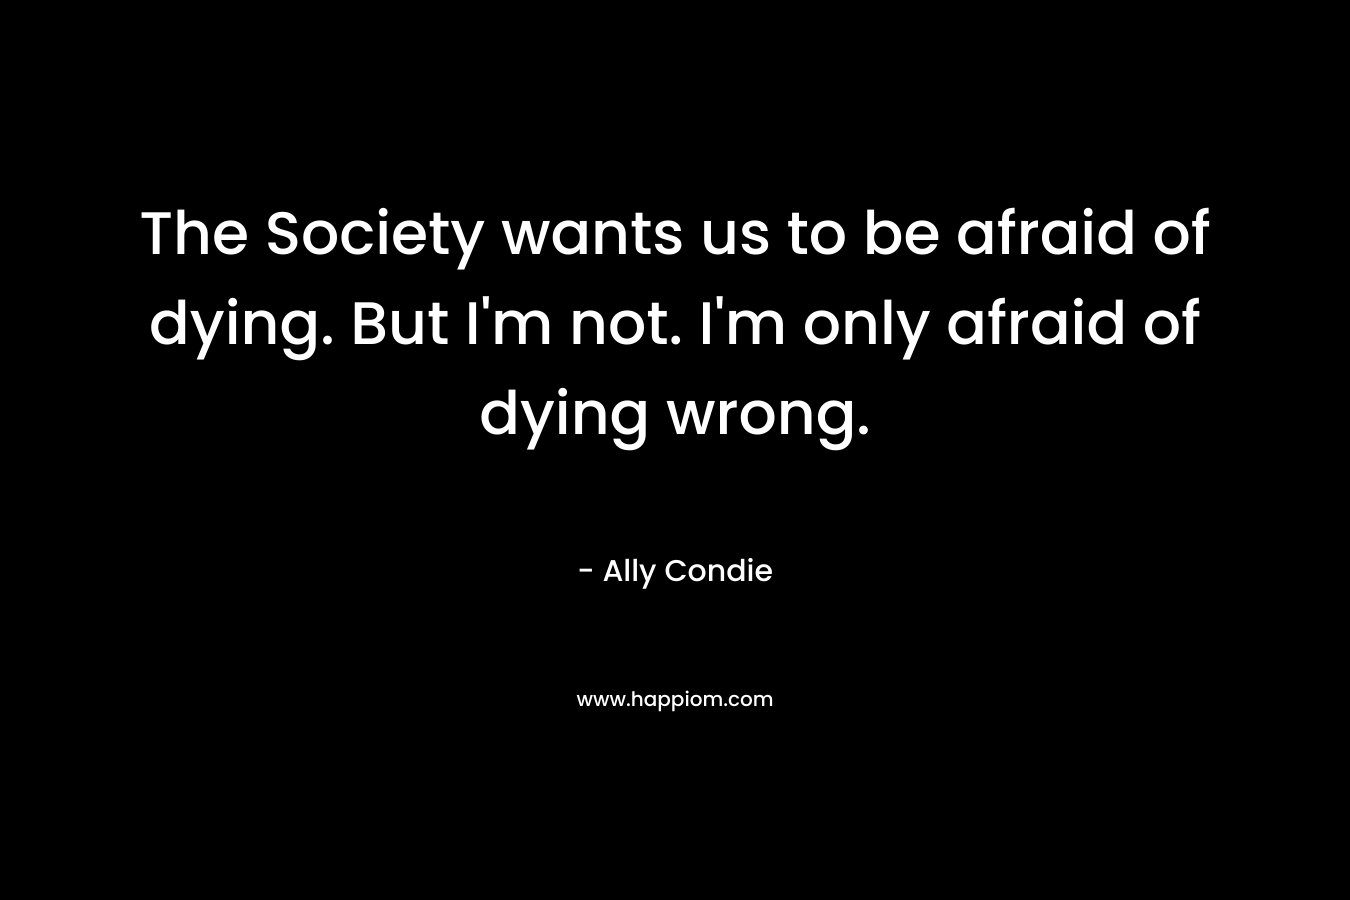 The Society wants us to be afraid of dying. But I'm not. I'm only afraid of dying wrong.